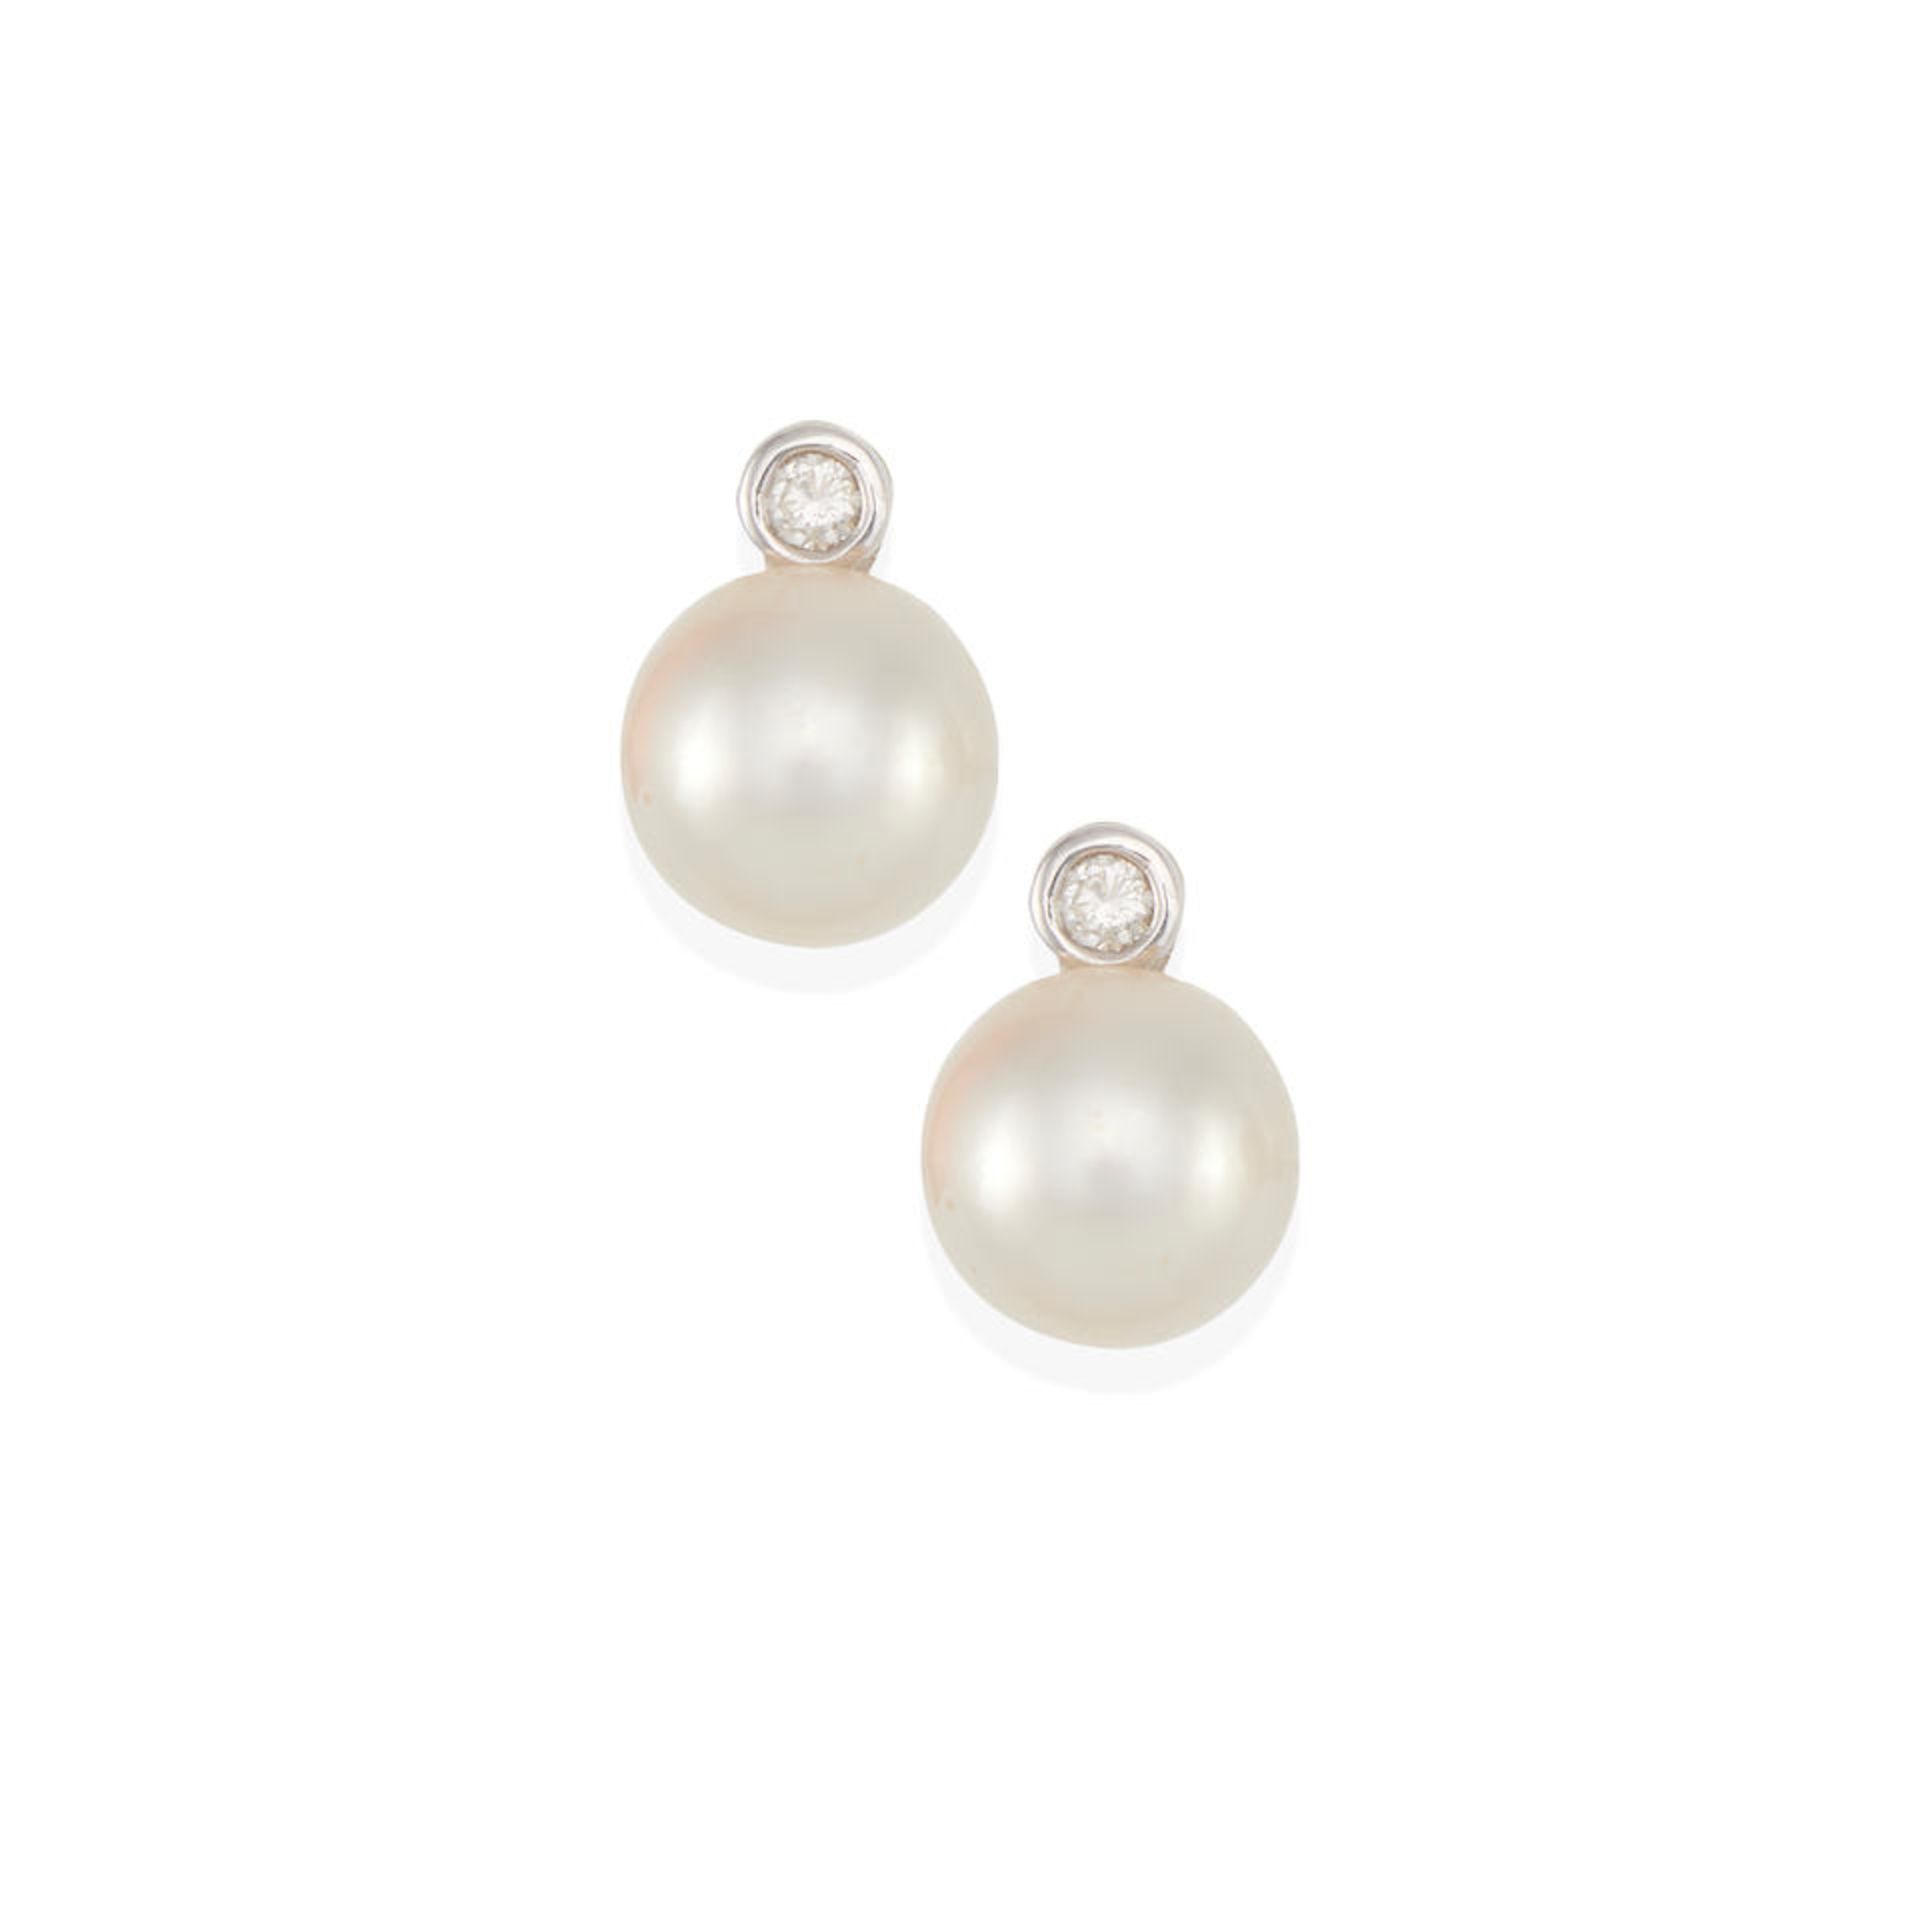 A PAIR OF 18K WHITE GOLD, SOUTH SEA CULTURED PEARL AND DIAMOND EARRINGS